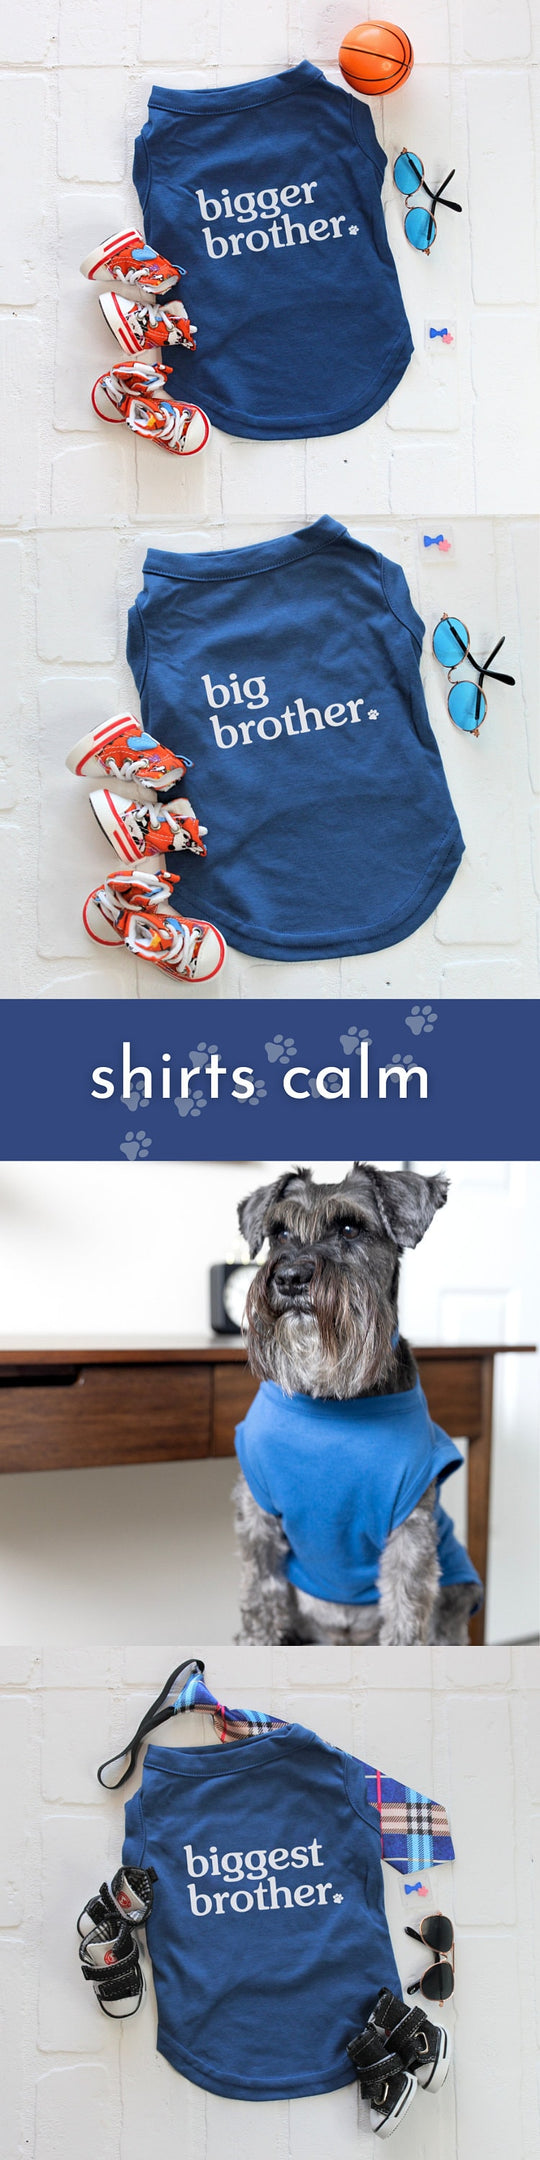 Bigger Brother TShirt for Pet Family, Pregnancy Announcement Tee for Dog